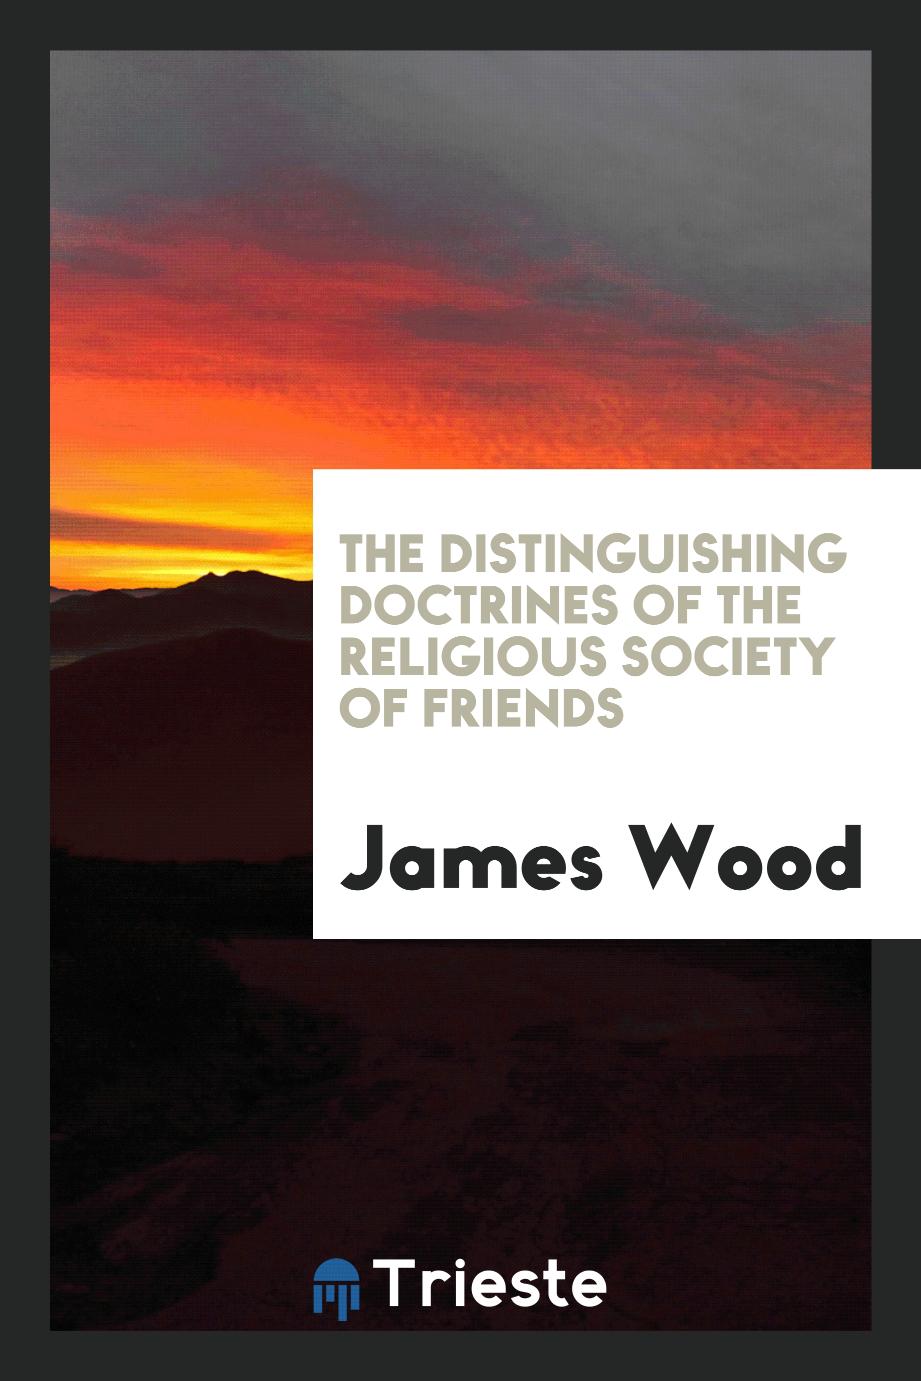 The Distinguishing Doctrines of the Religious Society of Friends